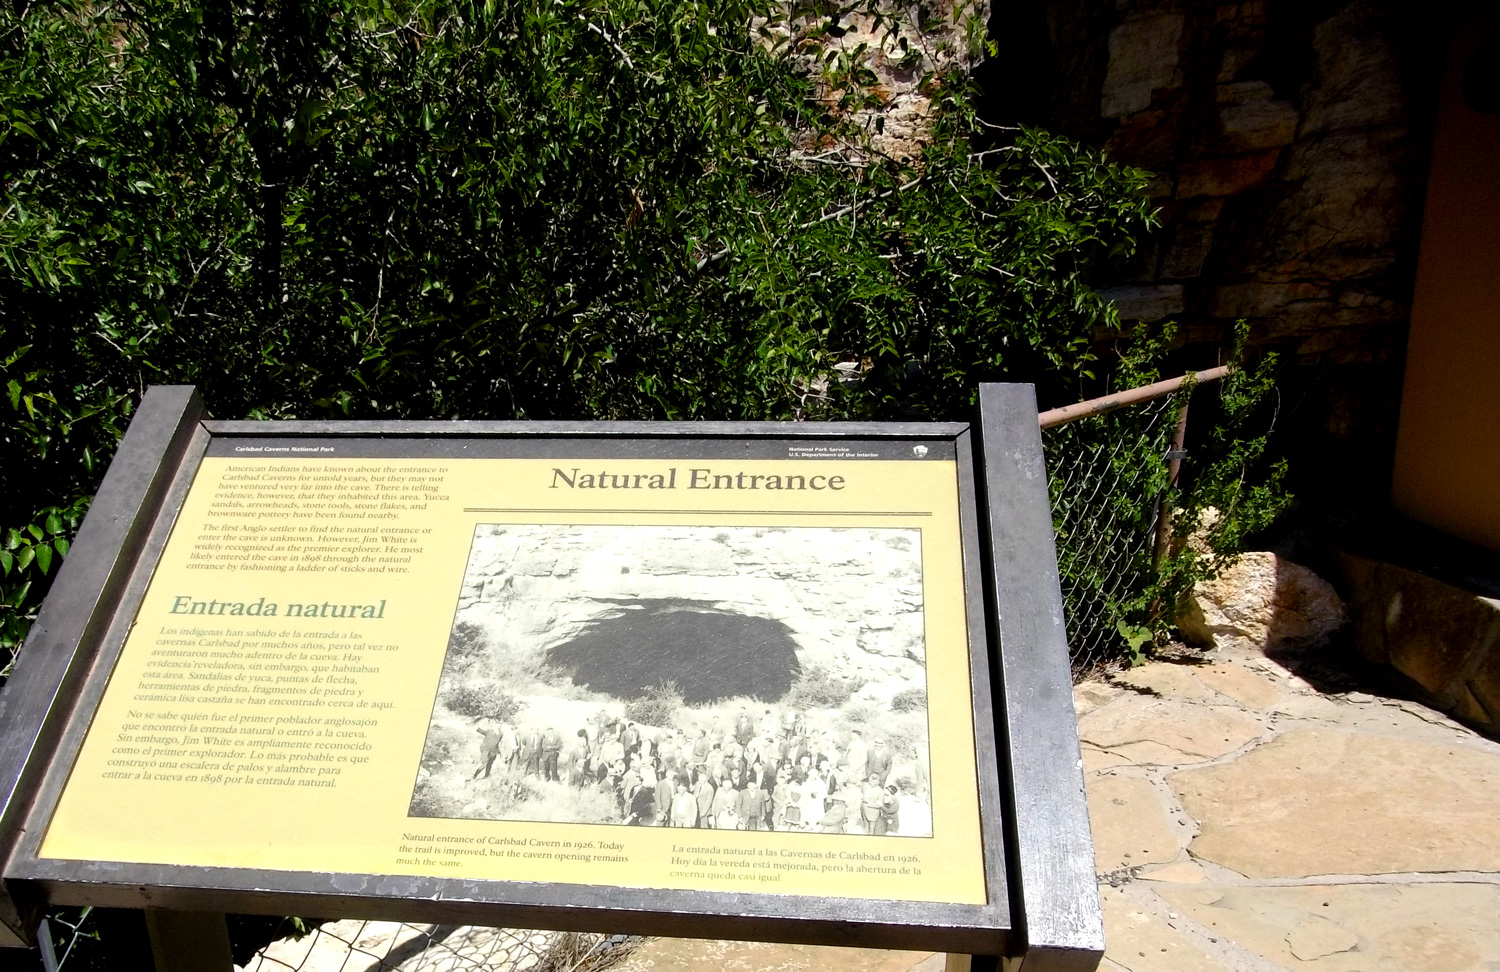 Sign about the Natural Entrance and American Indians.